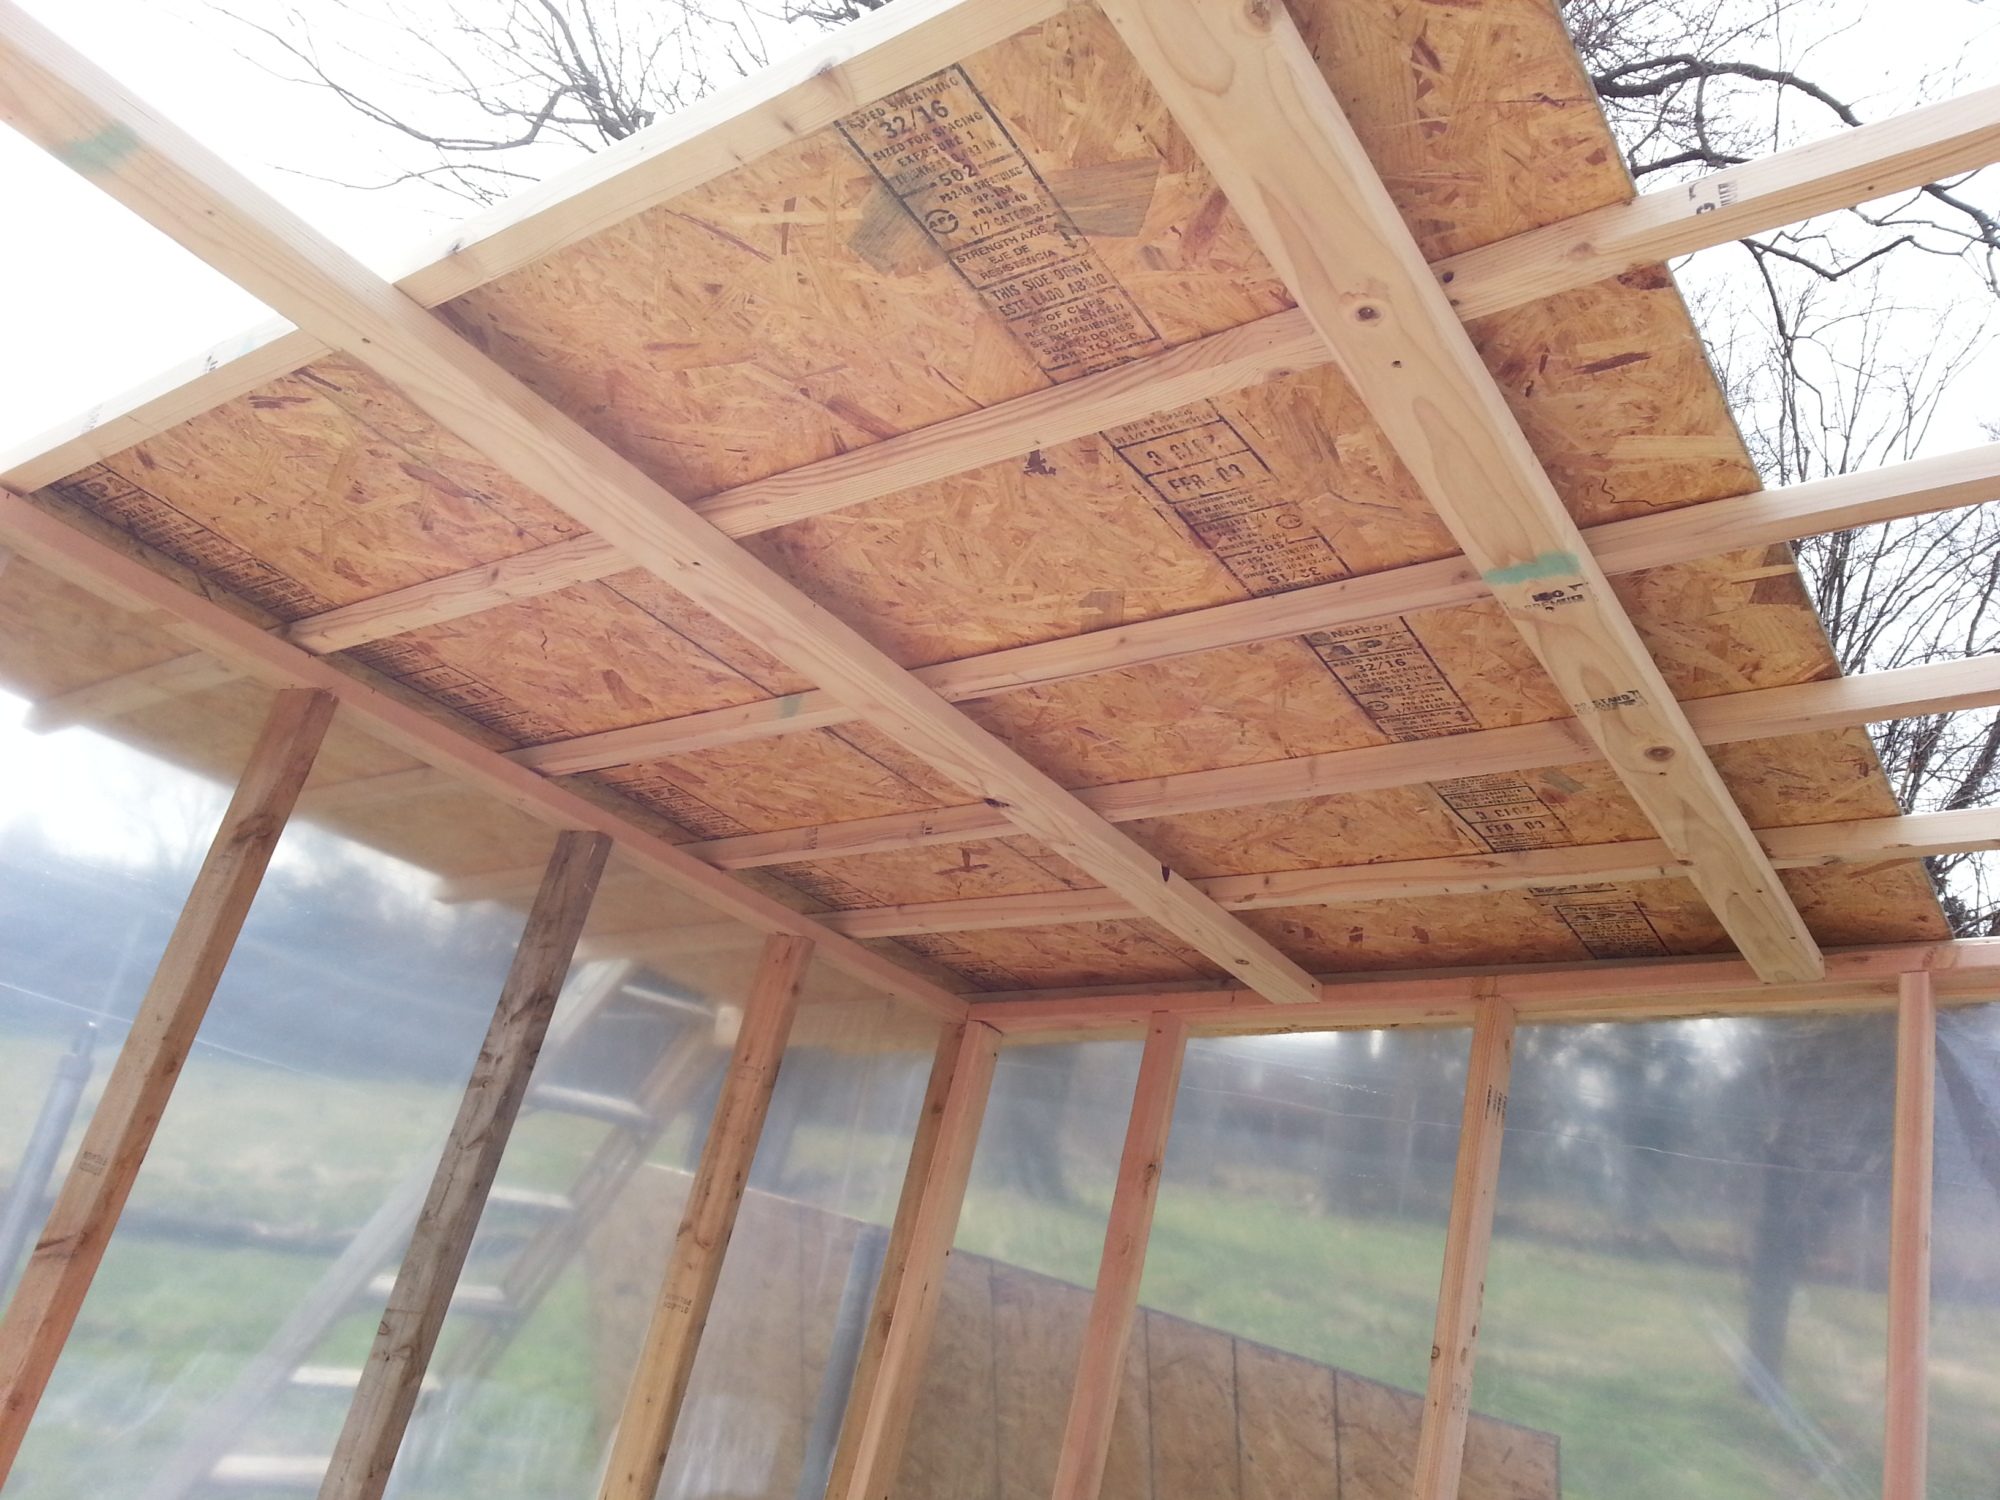 Used 1/2" plywood for the roof also used two 12 foot 2x4's for support on the roof.